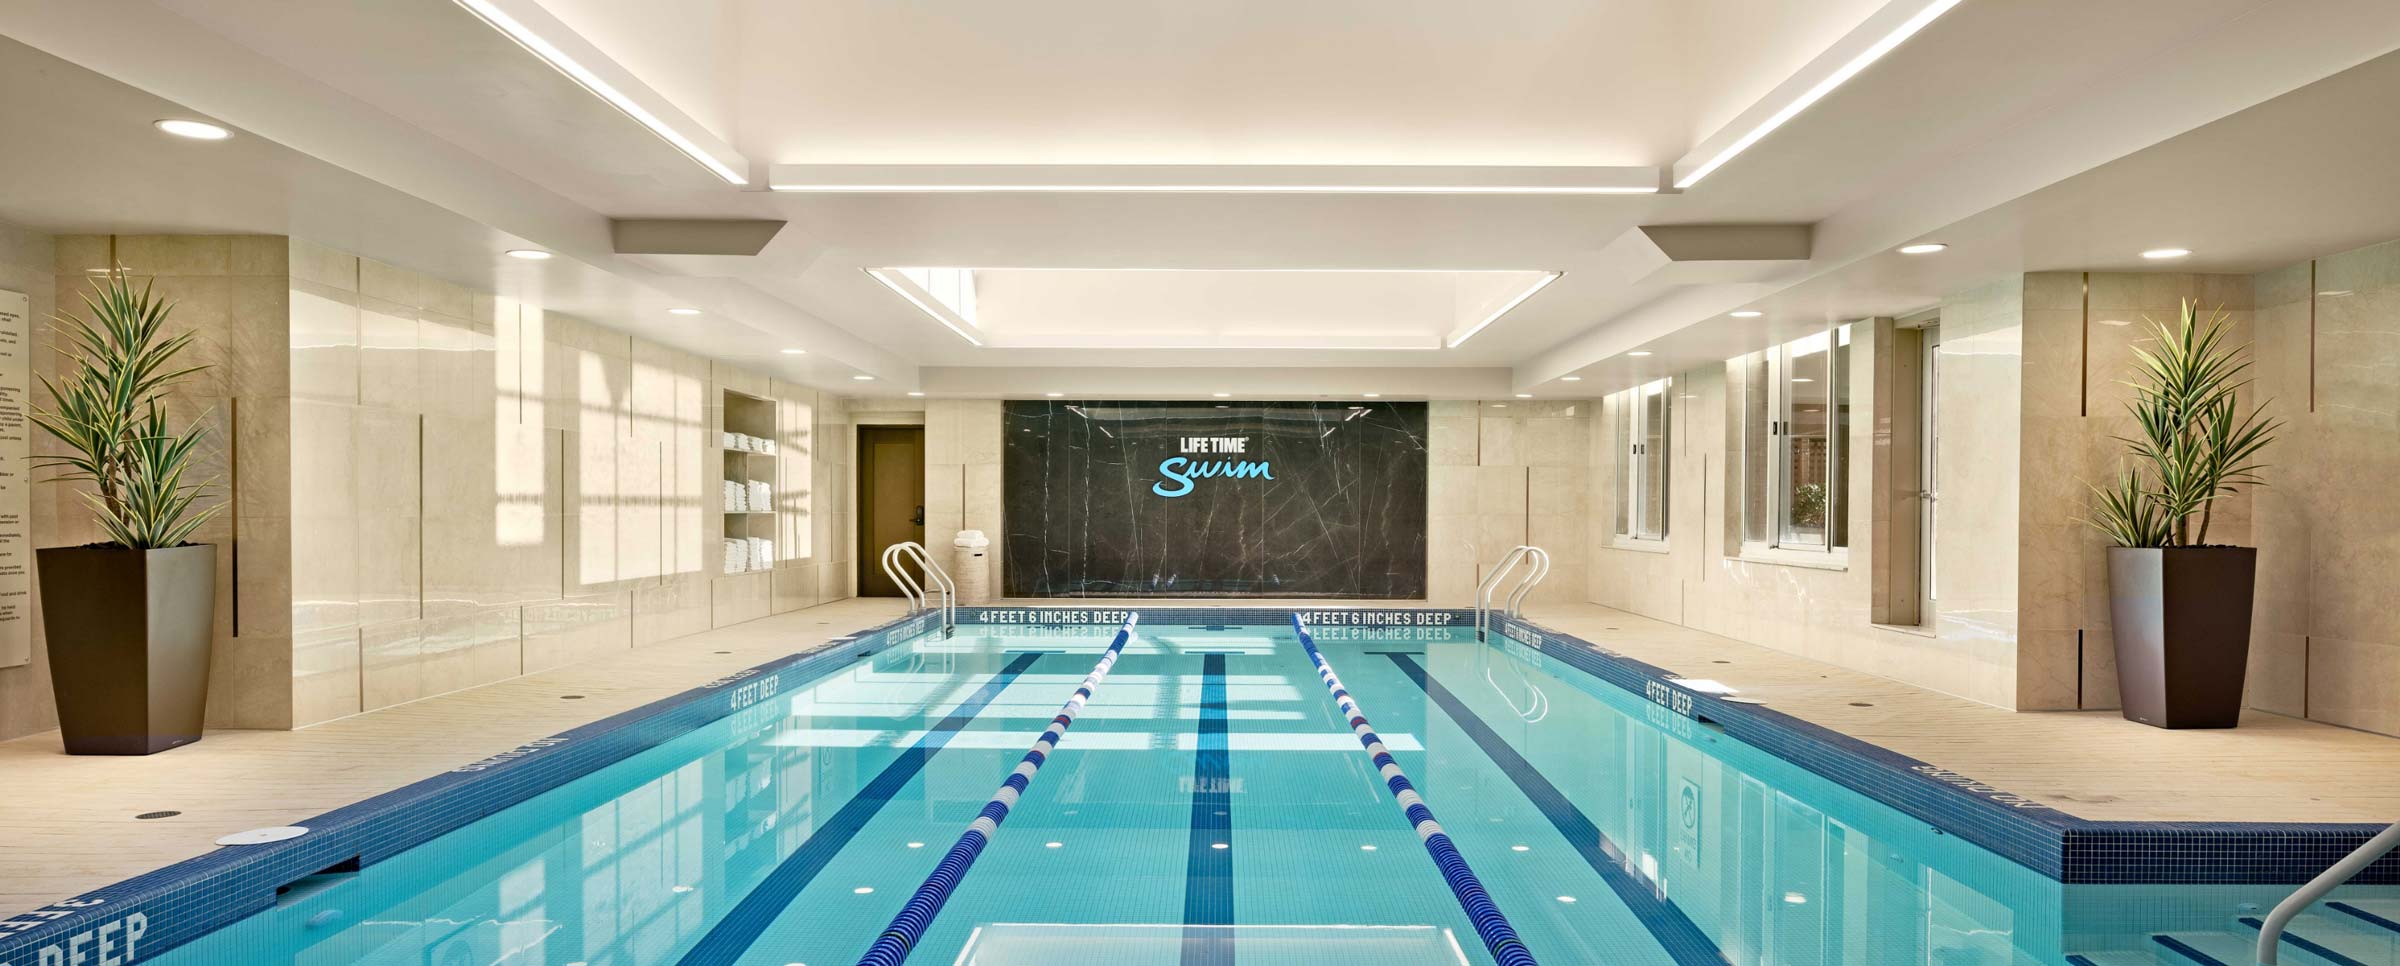 a 3 lane indoor lap pool with lane lines